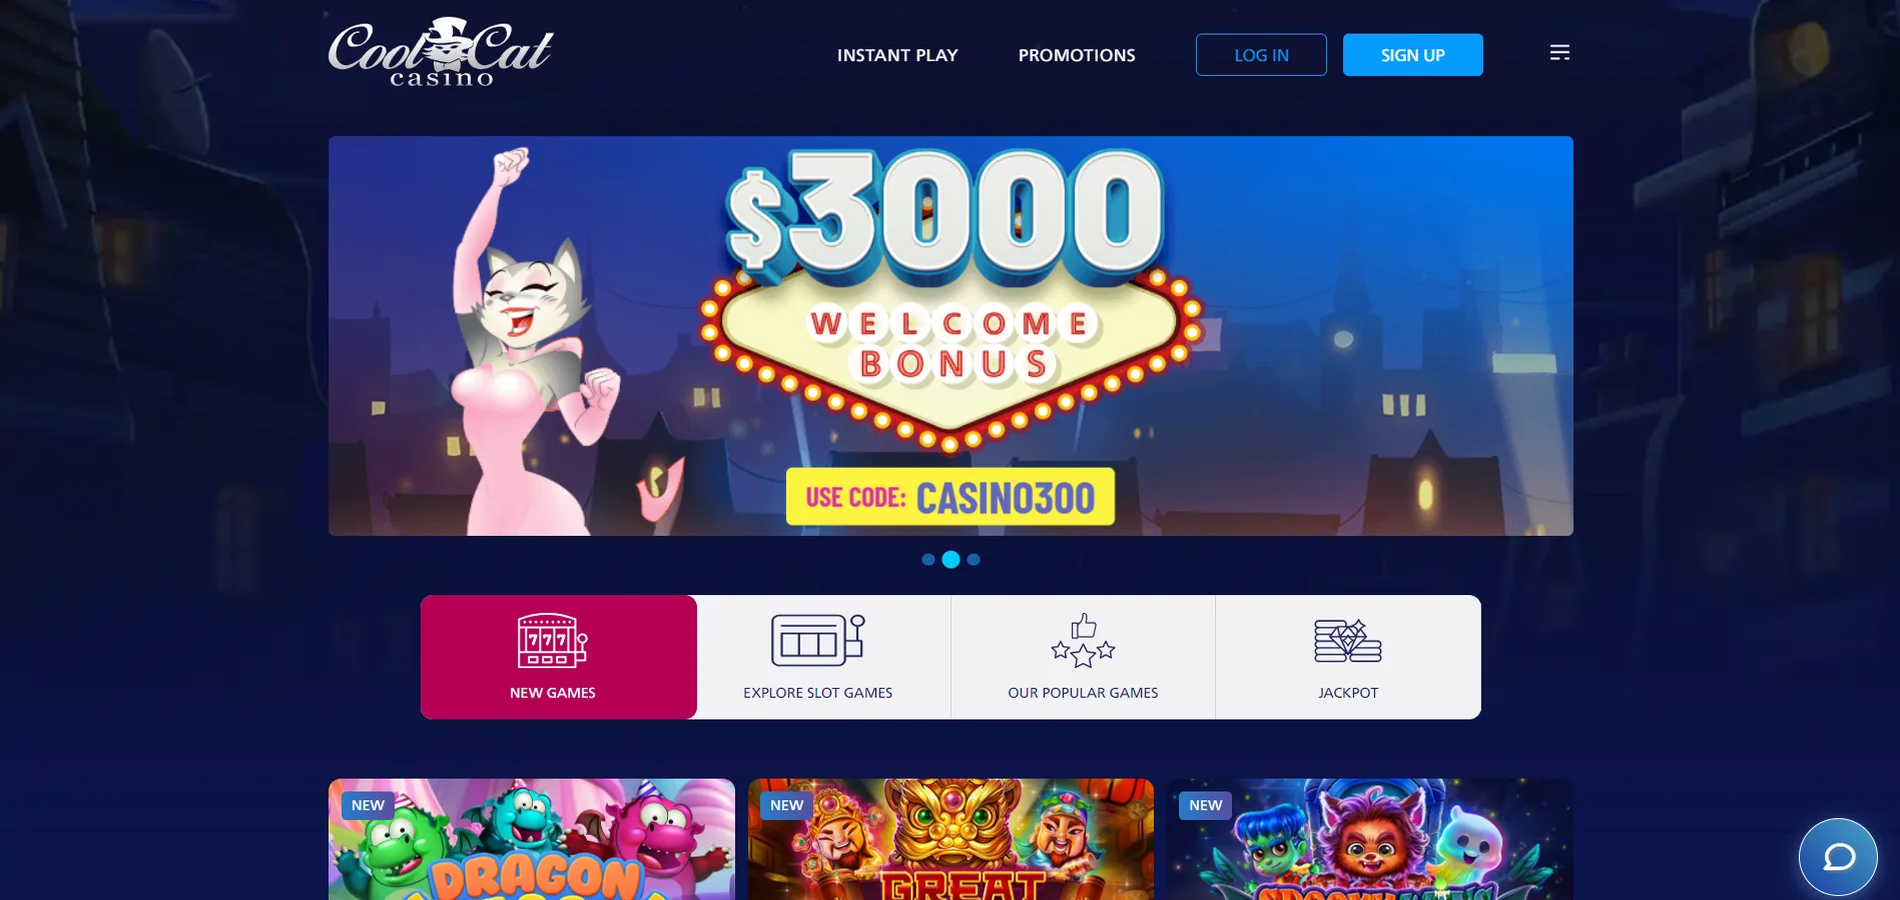 The homepage of Cool Cat Casino